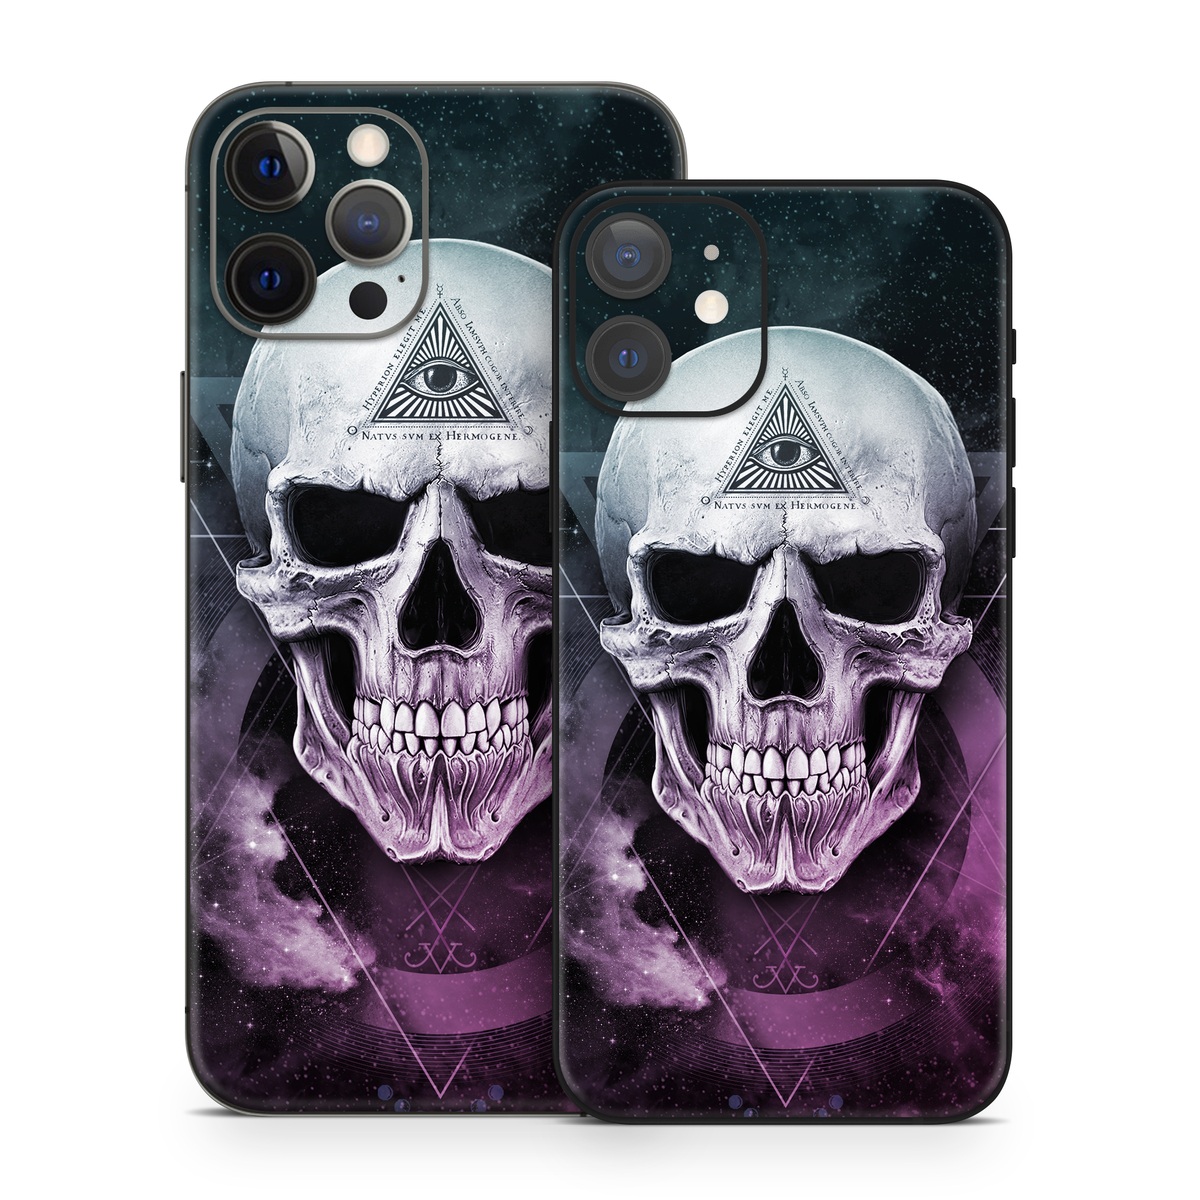 iPhone 12 Skin design of Skull, Bone, Illustration, Font, Jaw, Fictional character, Graphic design, Graphics, Art, with black, white, gray, purple colors